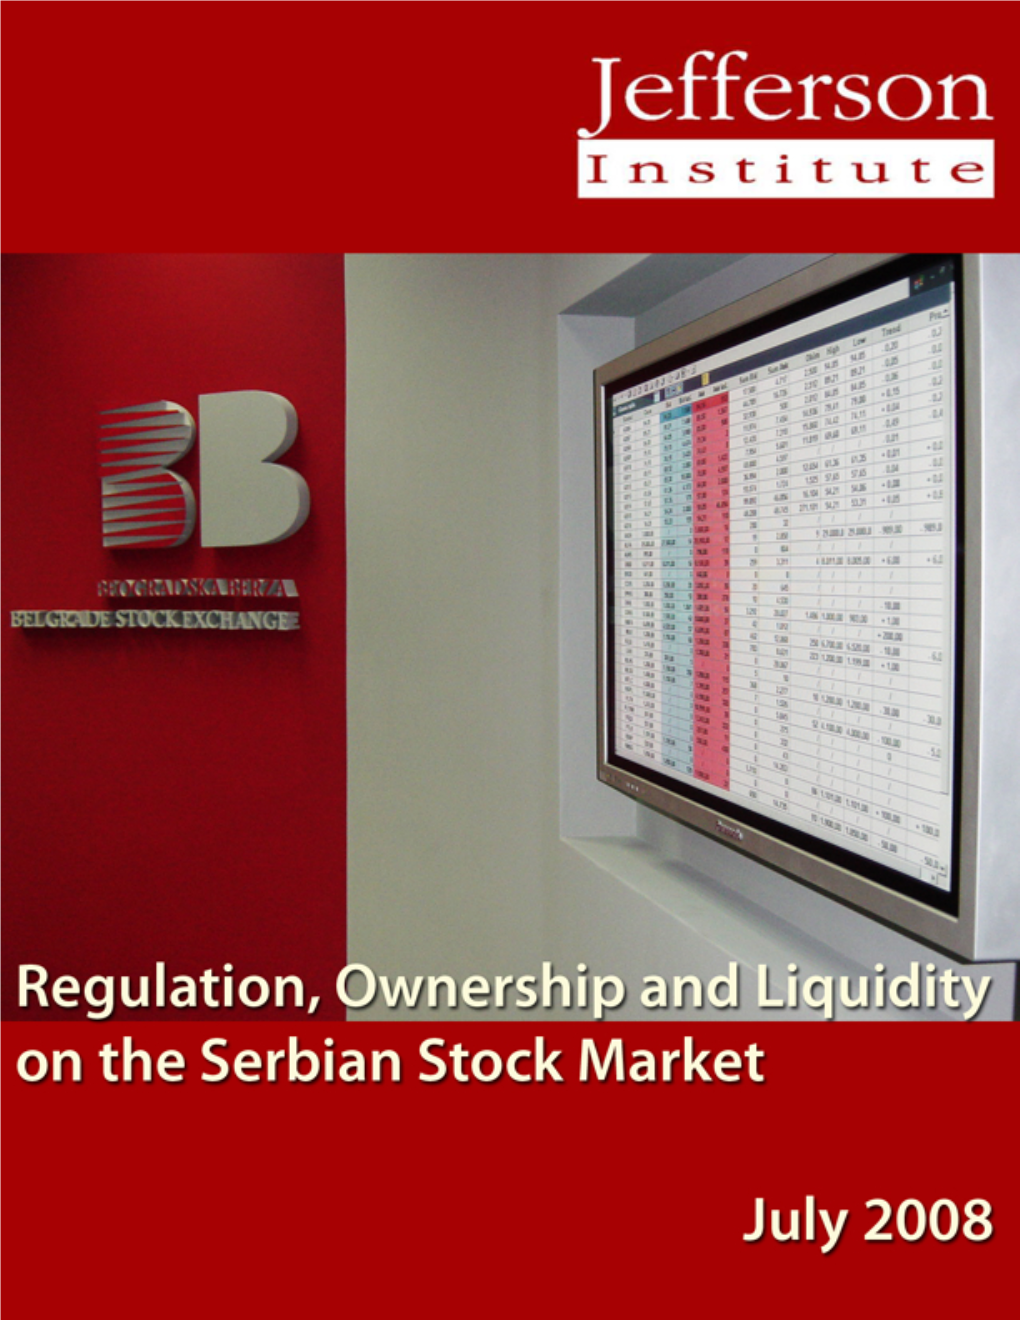 Regulation, Ownership, and Liquidity in the Serbian Stock